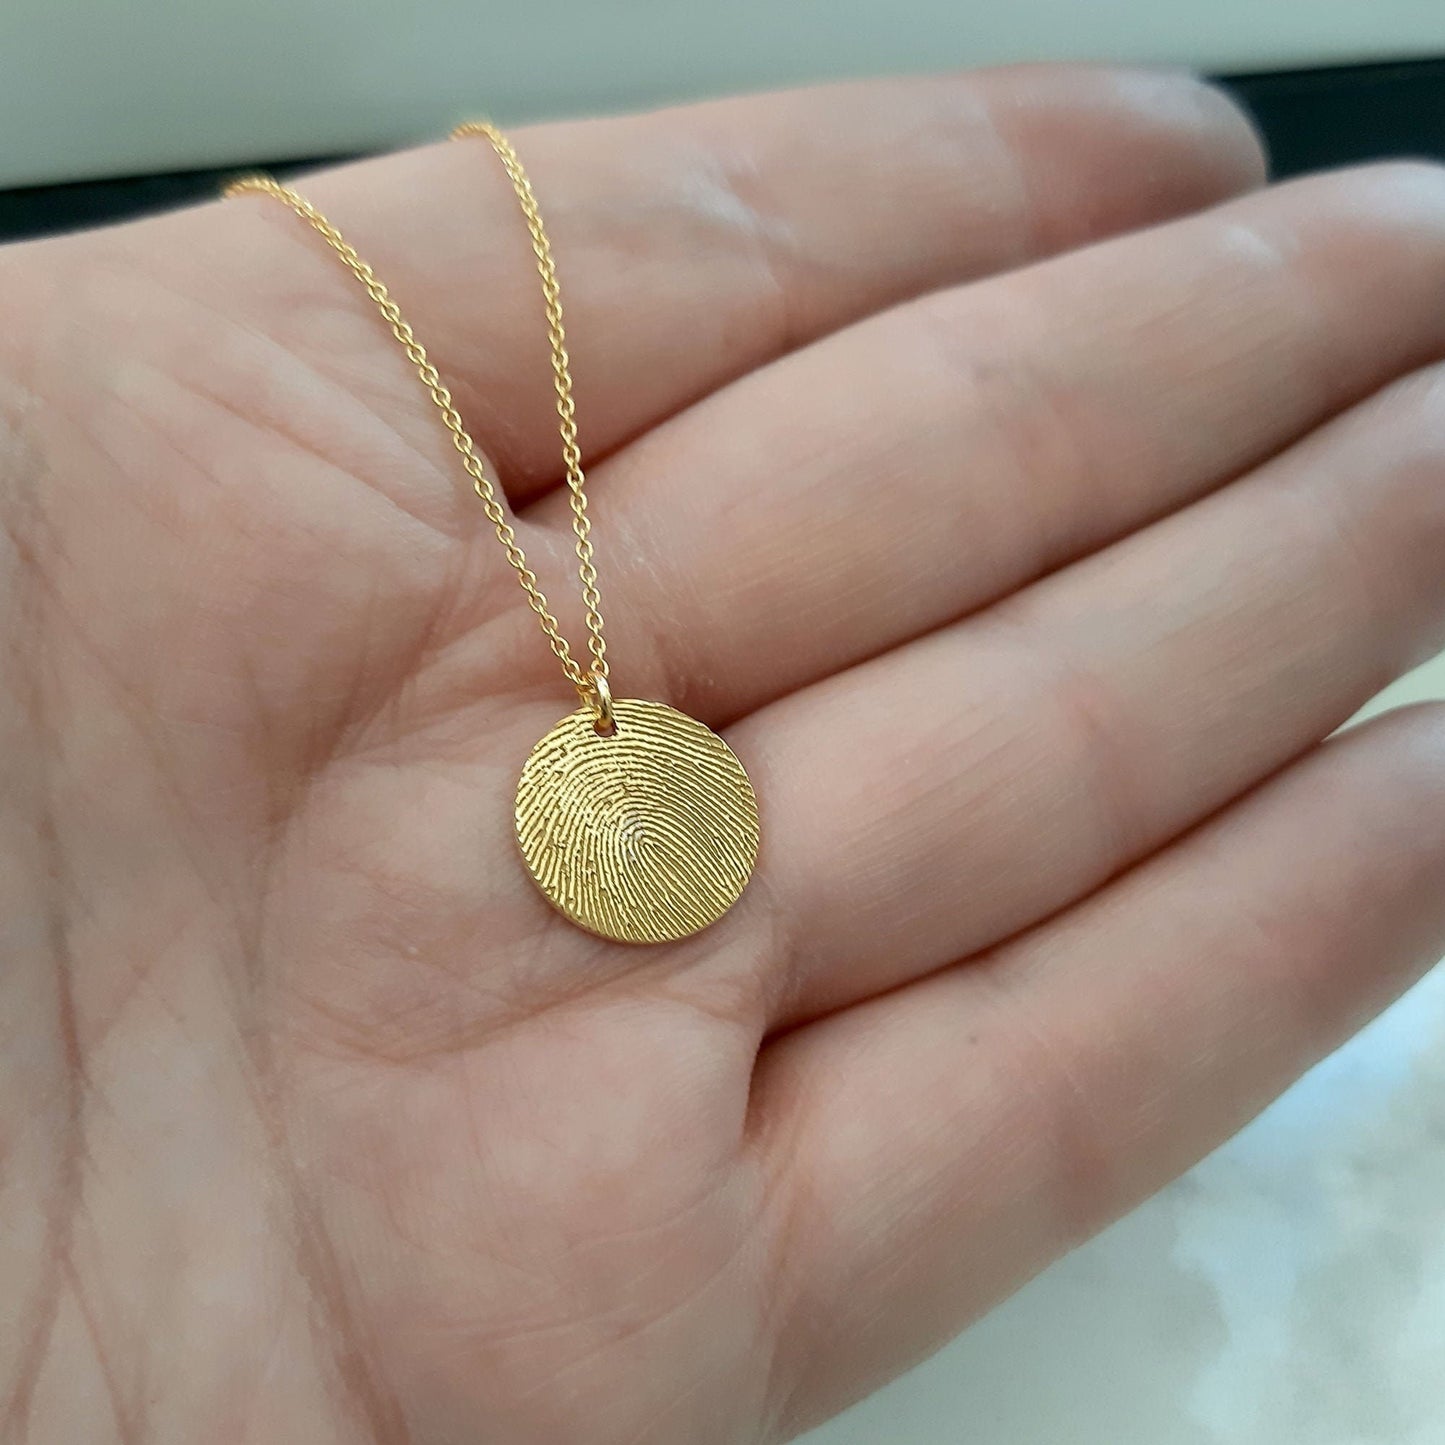 Handwriting Necklace • Custom Handwriting Jewelry • Signature Disc Necklace • Fingerprint Necklace • MOTHERS GIFT  Yellow gold Memorial Gift